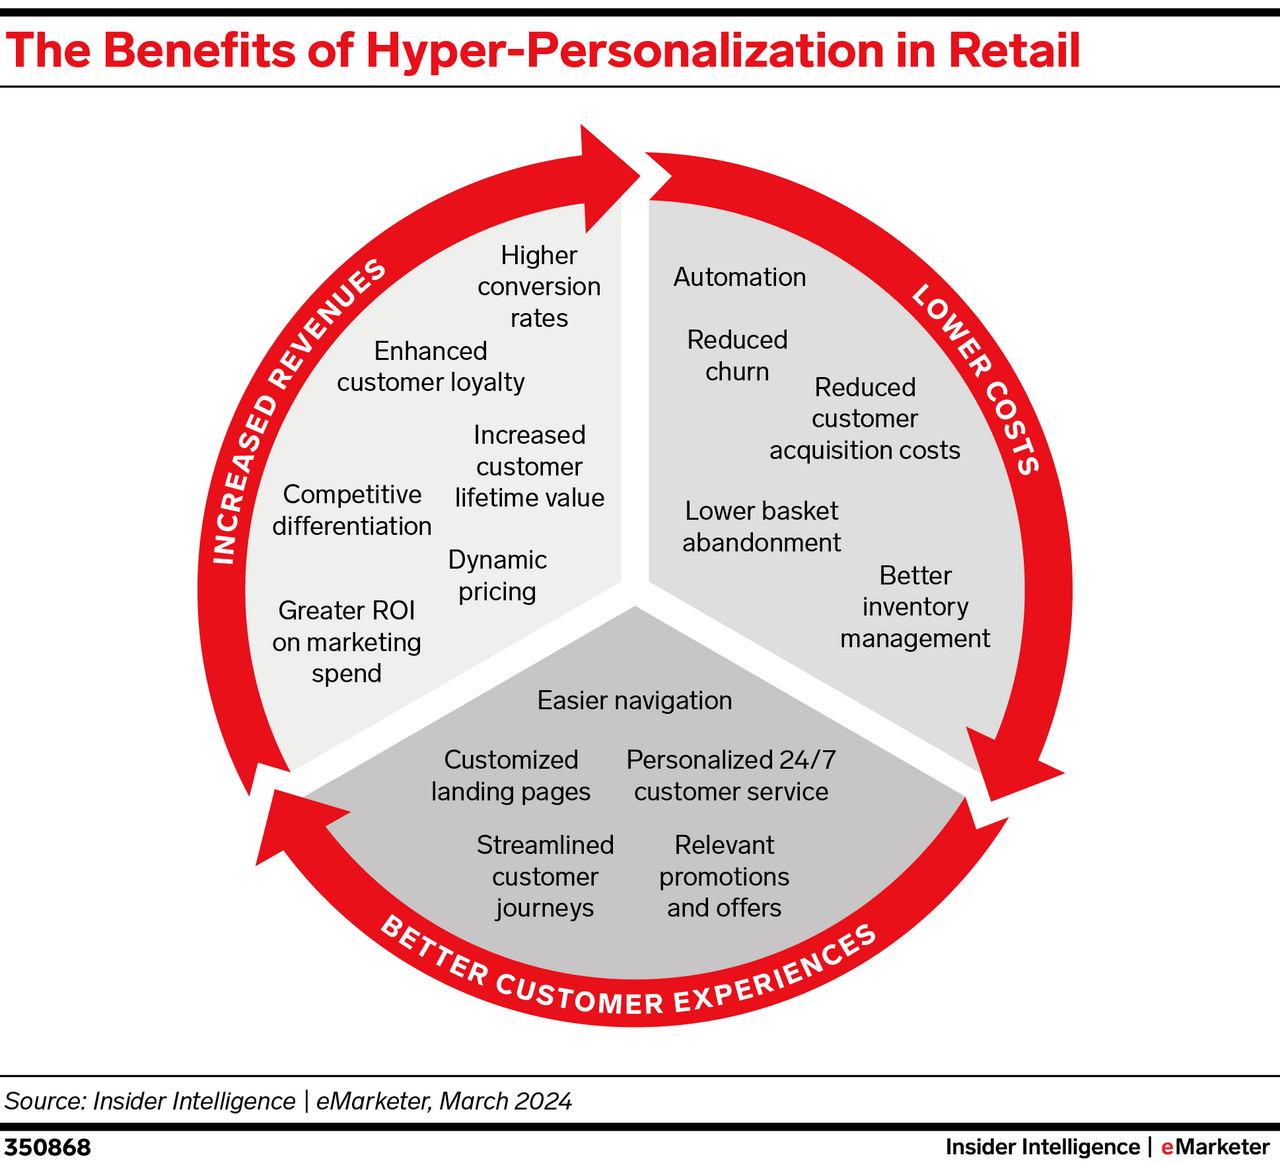 The Benefits of Hyper-Personalization in Retail